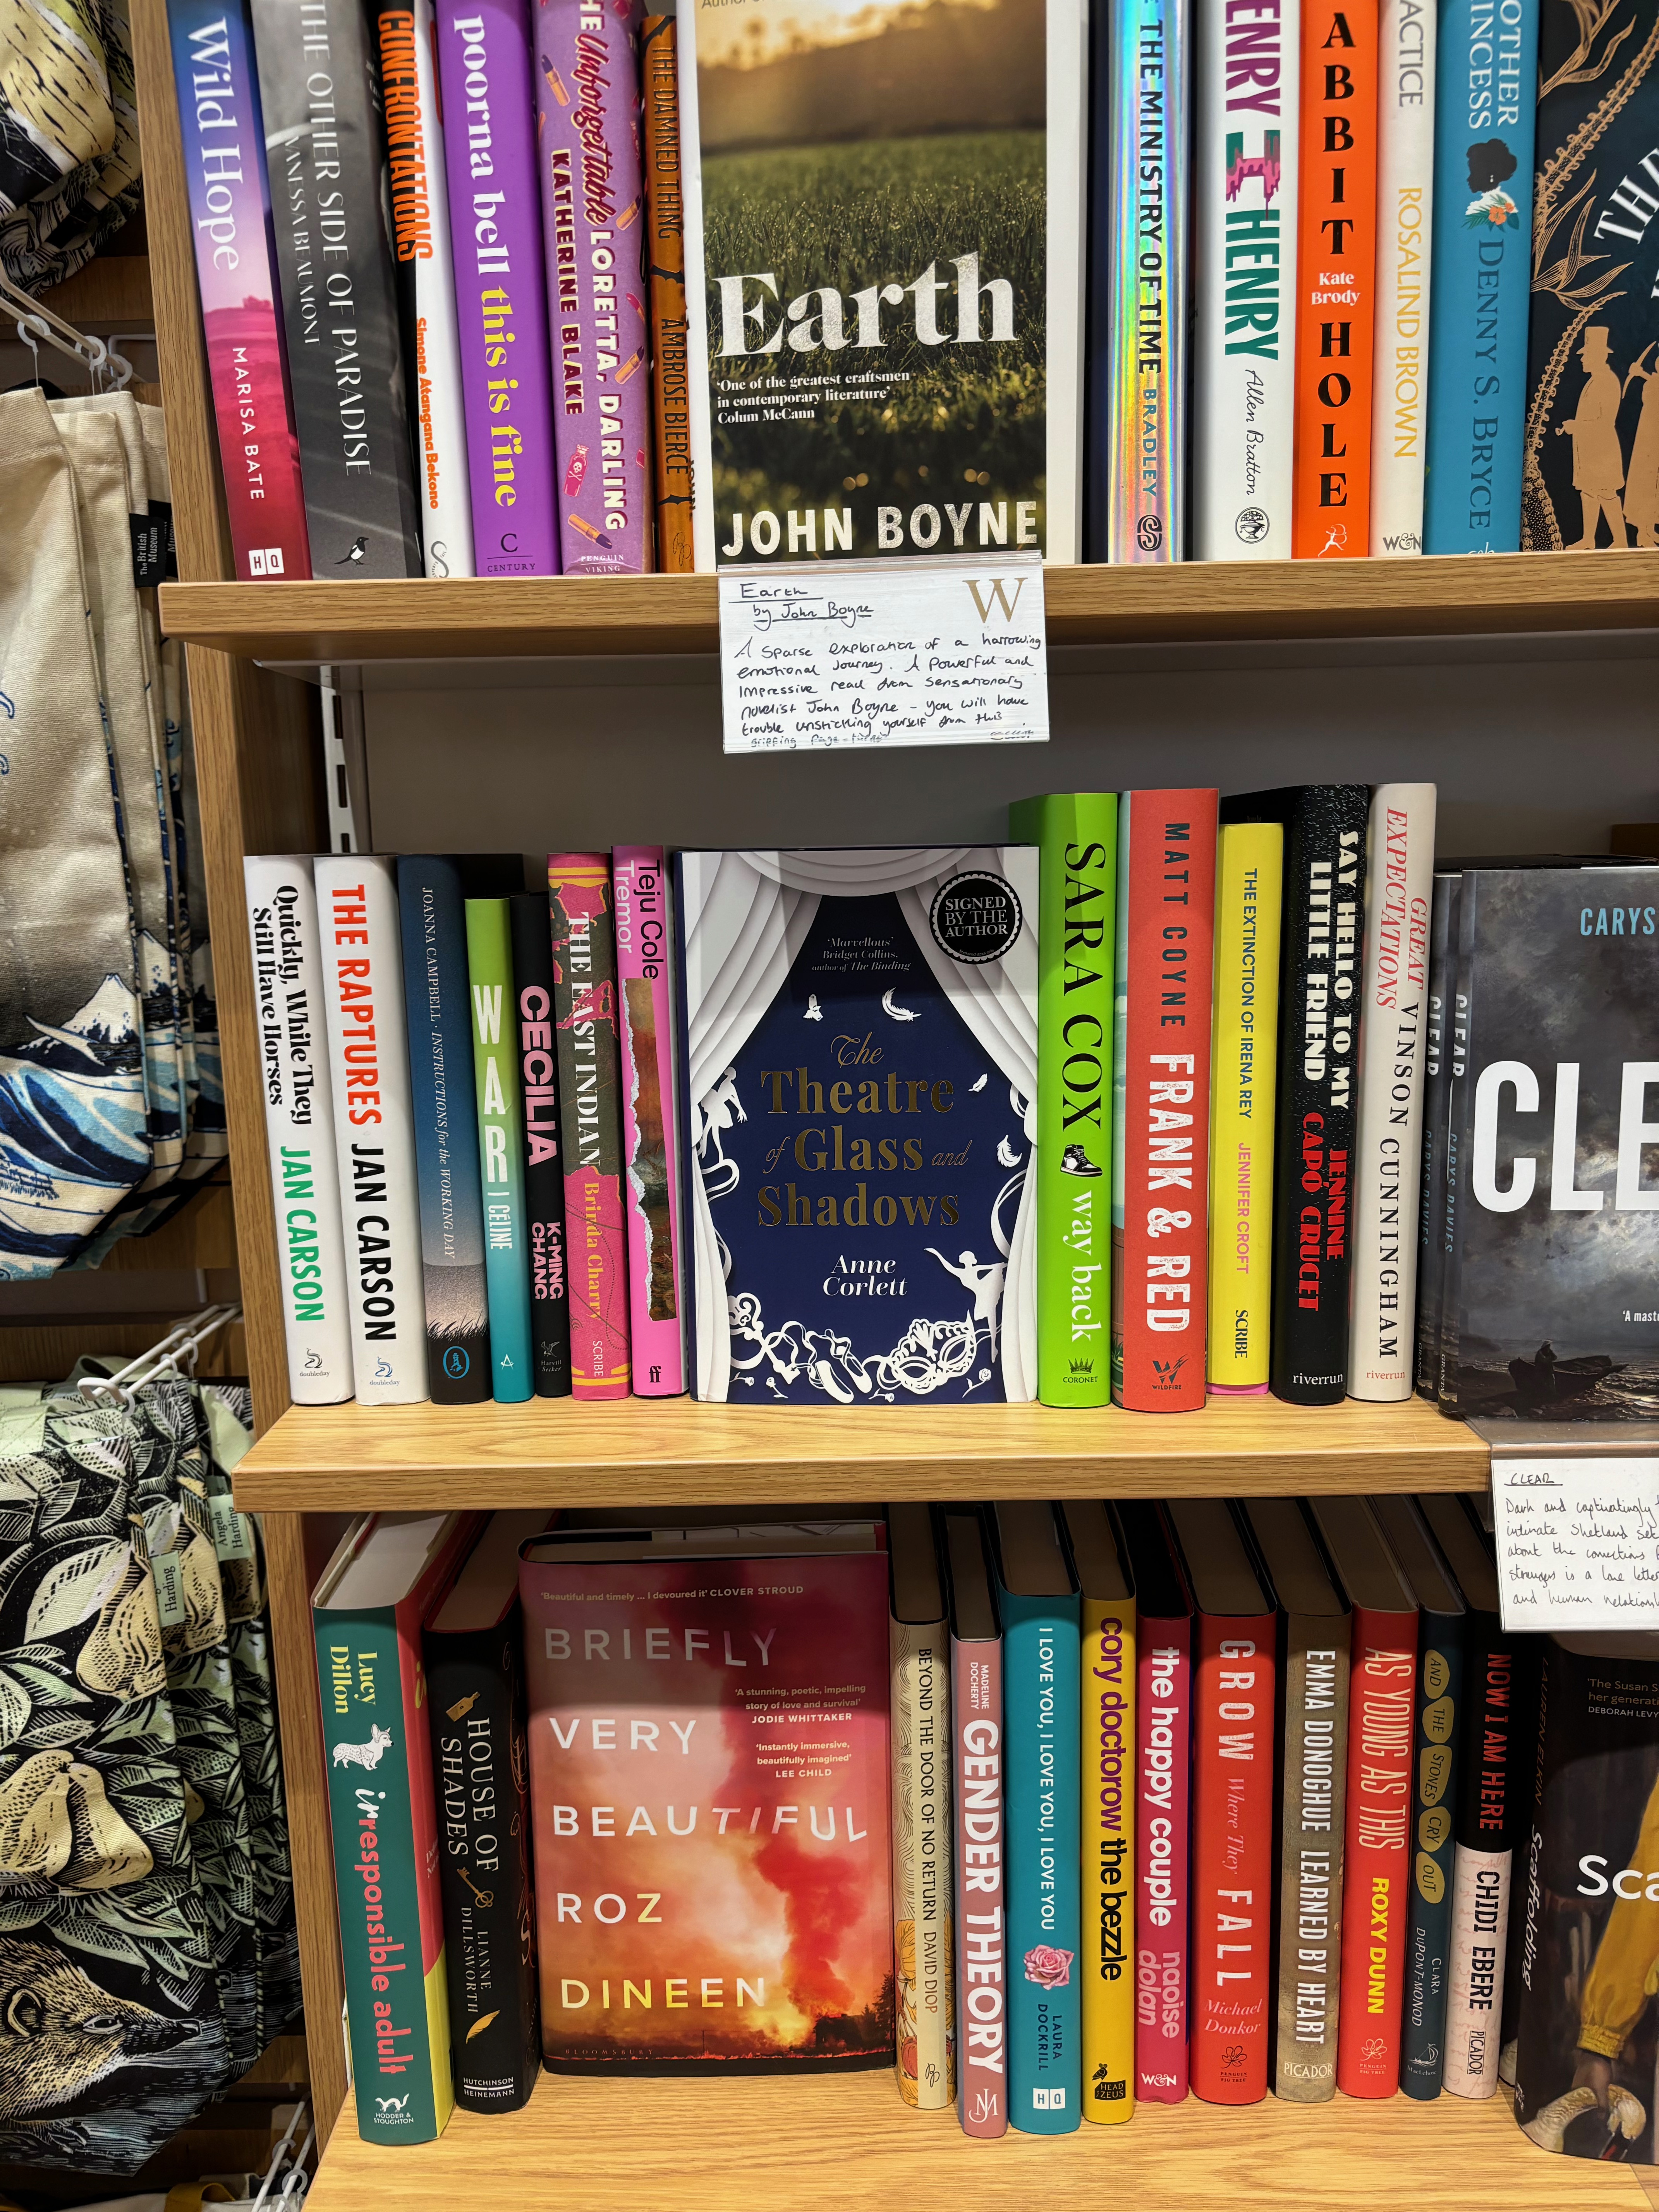 Bookshop sightings of The Theatre of Glass and Shadows